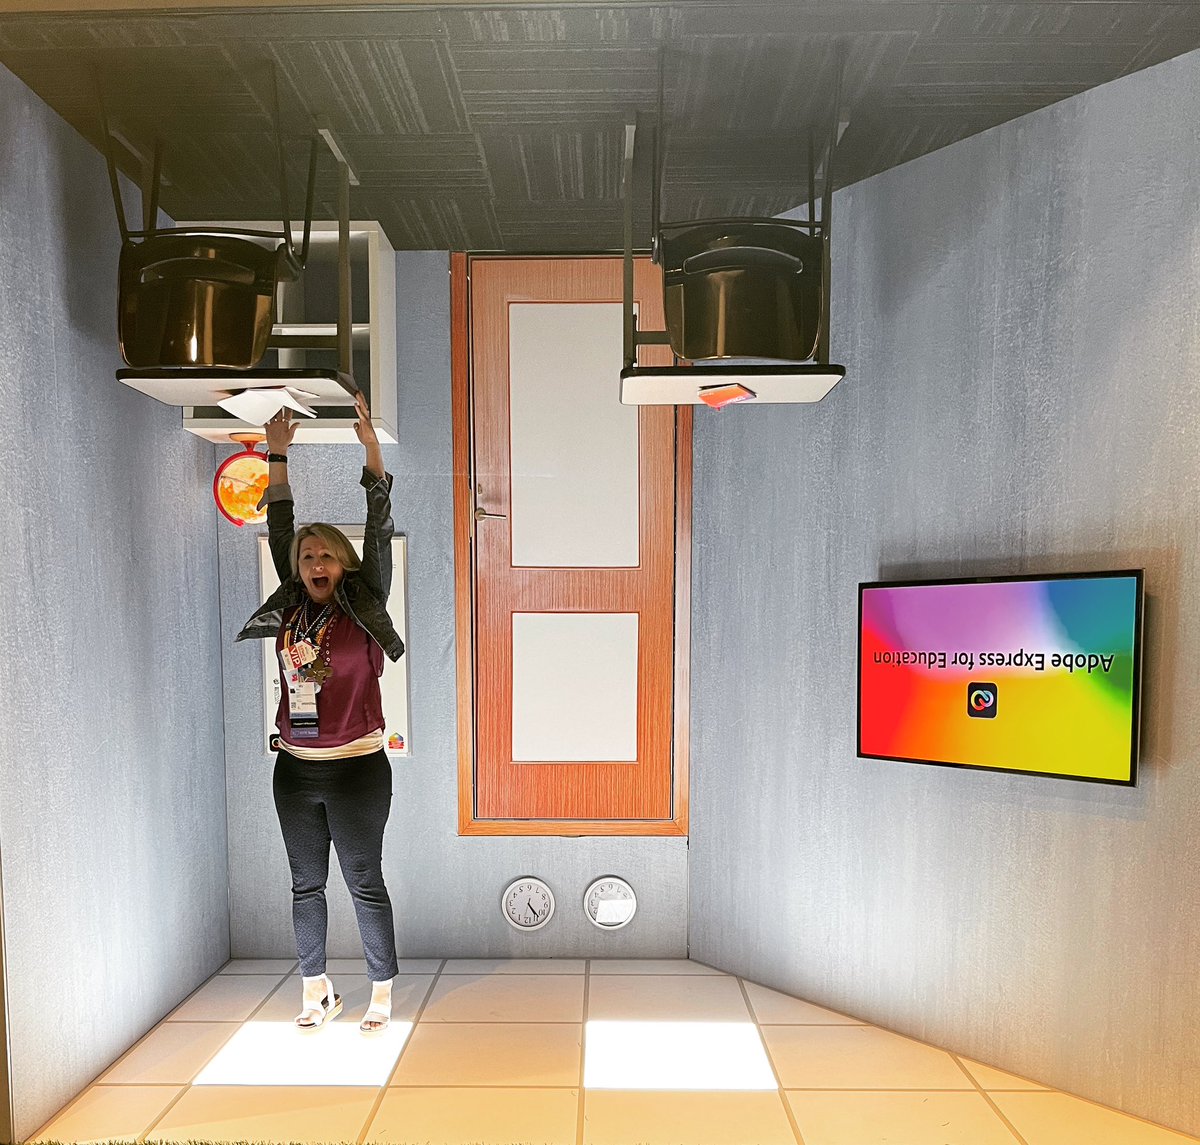 ISTE LOVE! 😍❤️ My FAVE ISTE memory was the @adobeexpress upside down classroom! Such great ideas to use with my students & fellow educators! 🔥My passion for student voice & creativity was ignited 🔥 @isteconnects @ISTEofficial #ShareYourISTELove #ISTELive